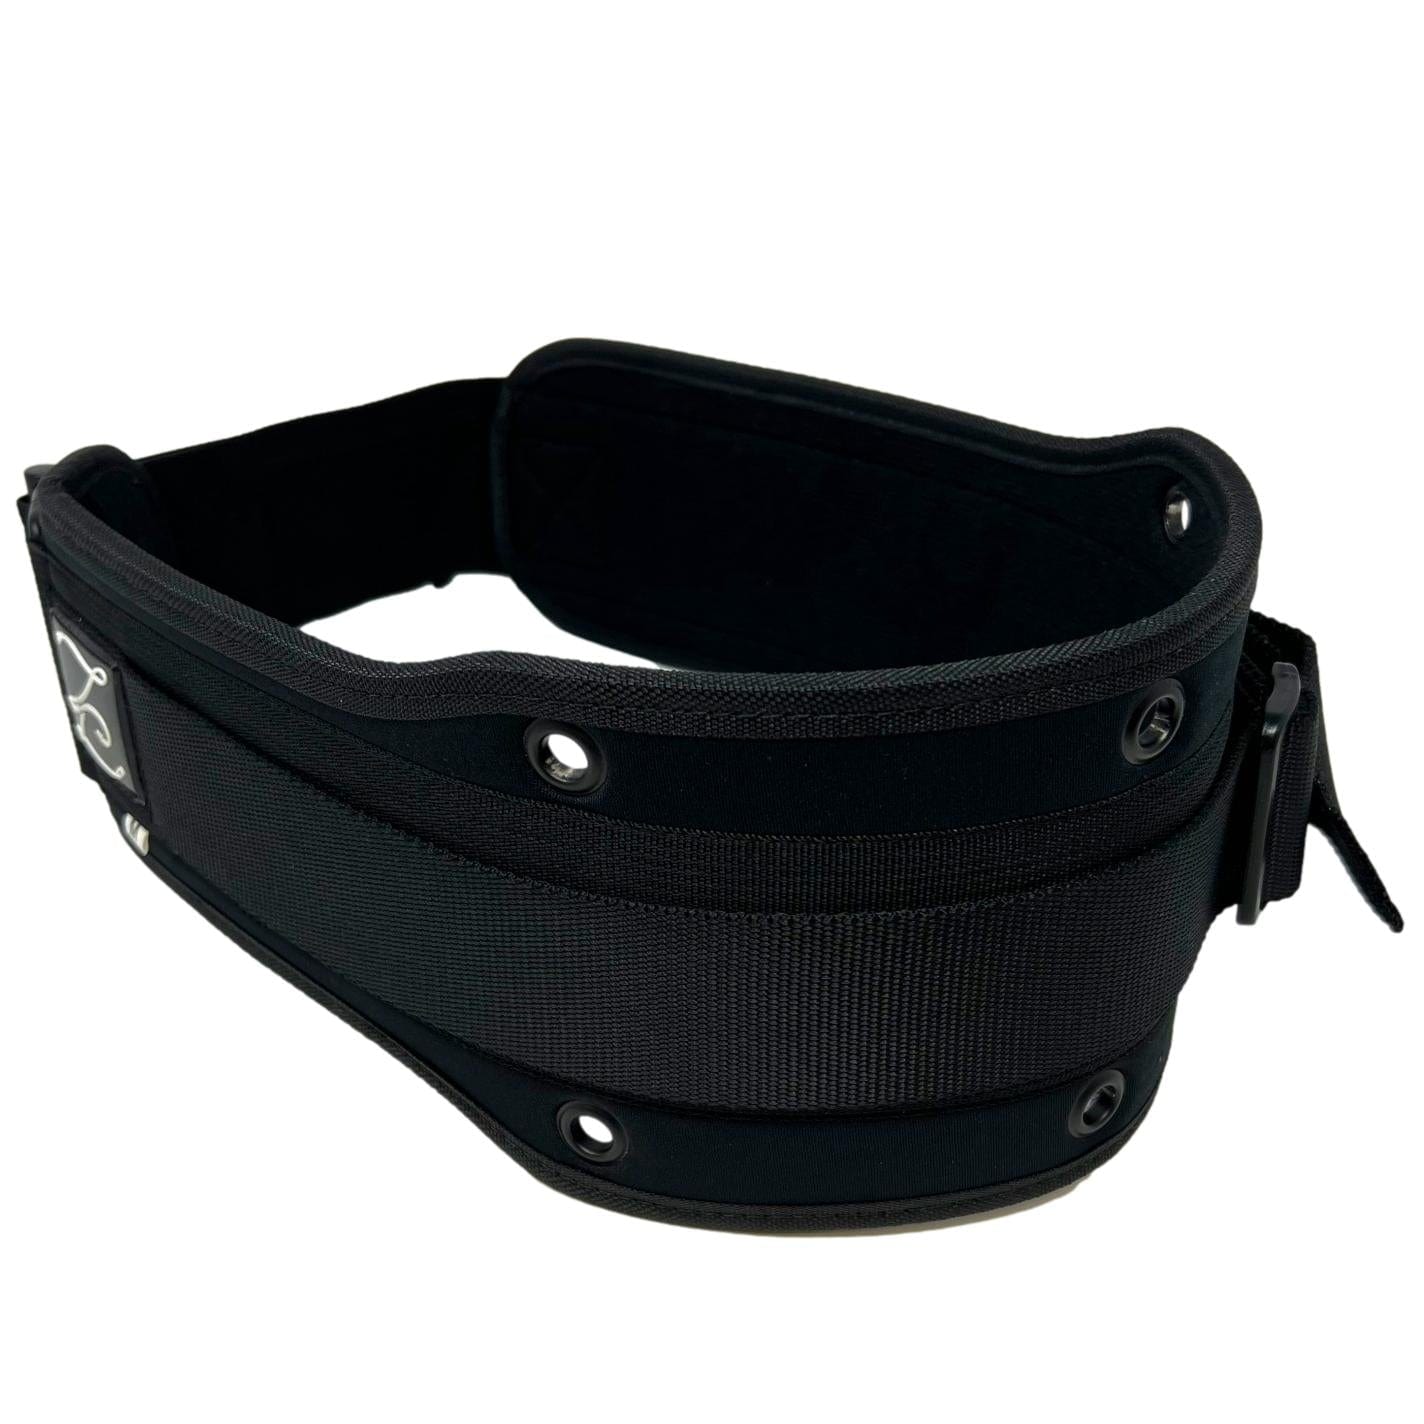 Wading and Surf Belts - The Saltwater Edge